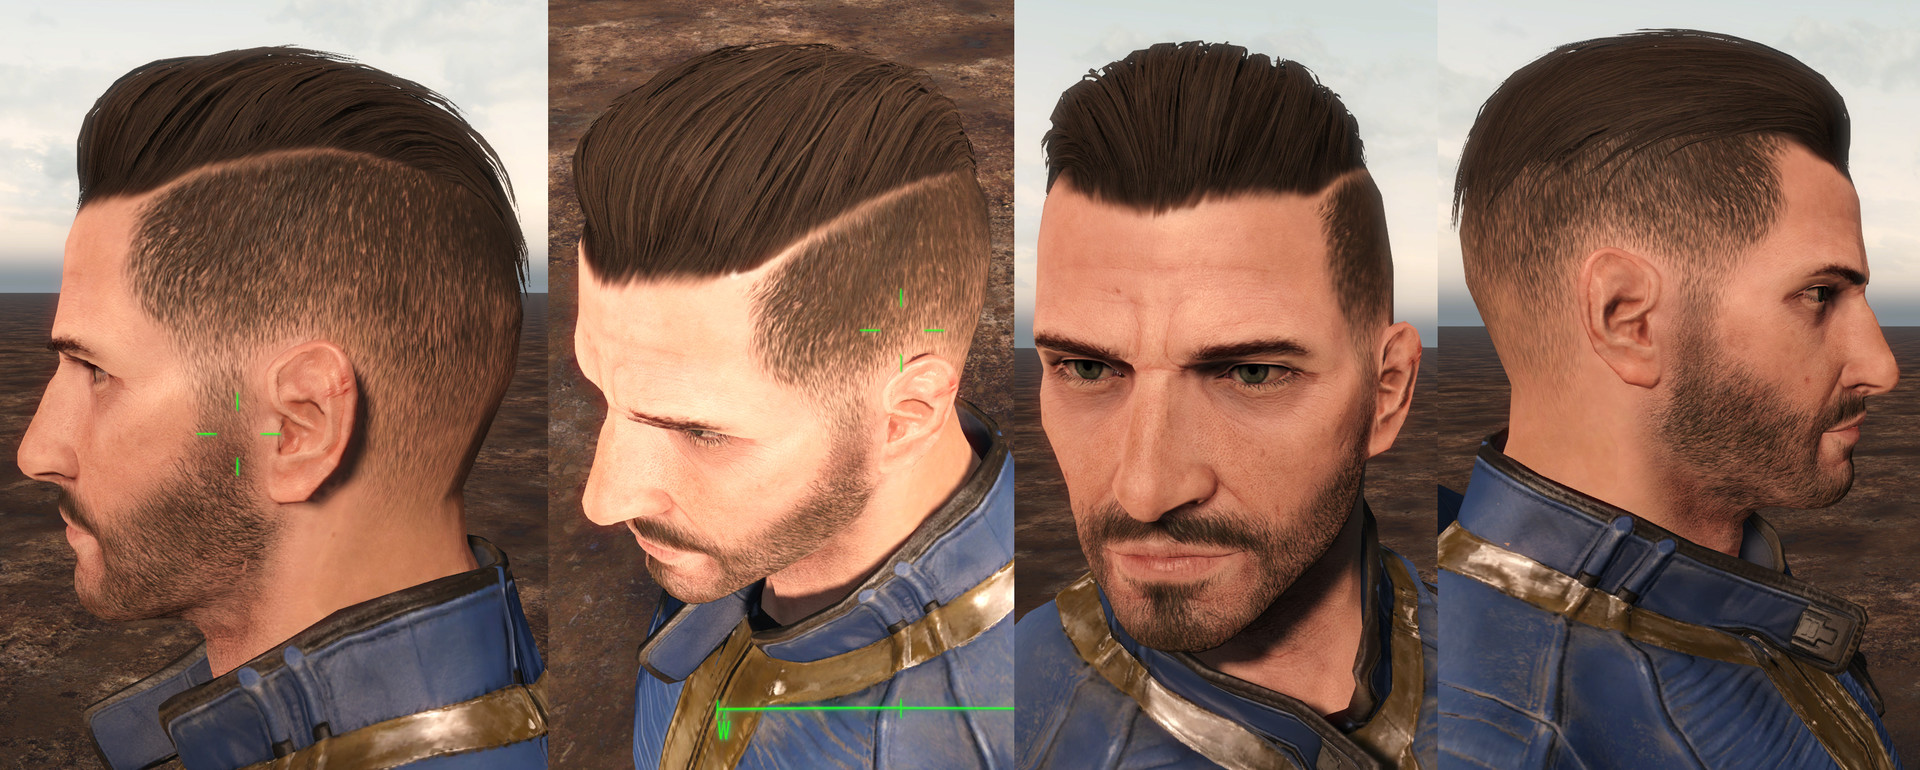 Ponytail hairstyles fallout 4 фото 98